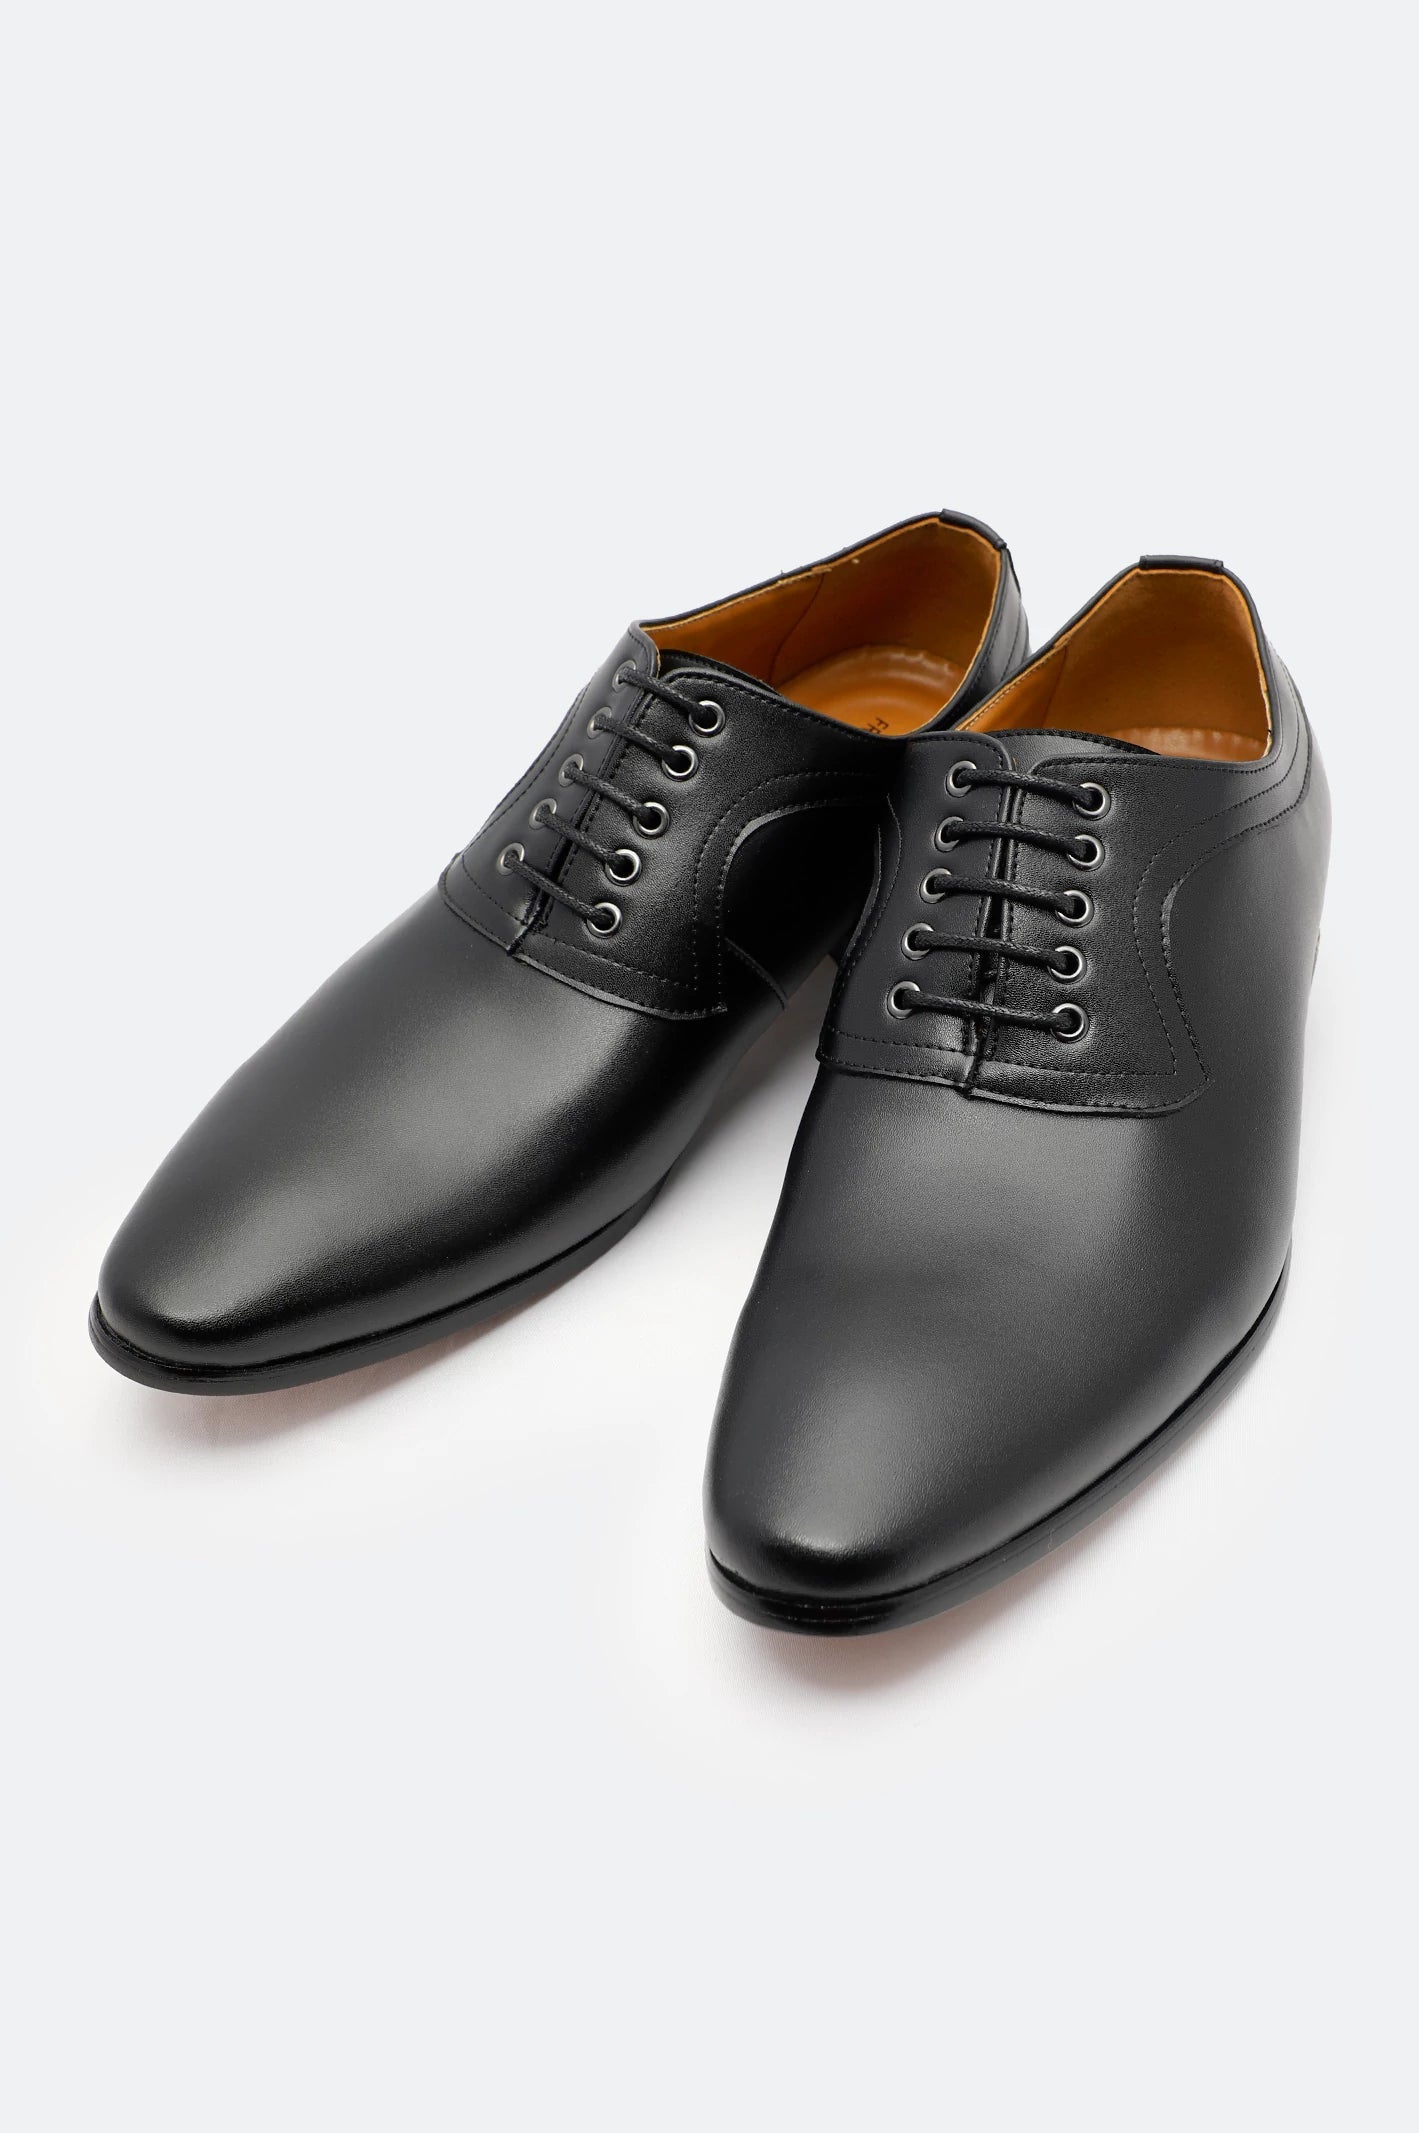 Black Formal Oxford Shoes Premium Shoes From French Emporio By Diners